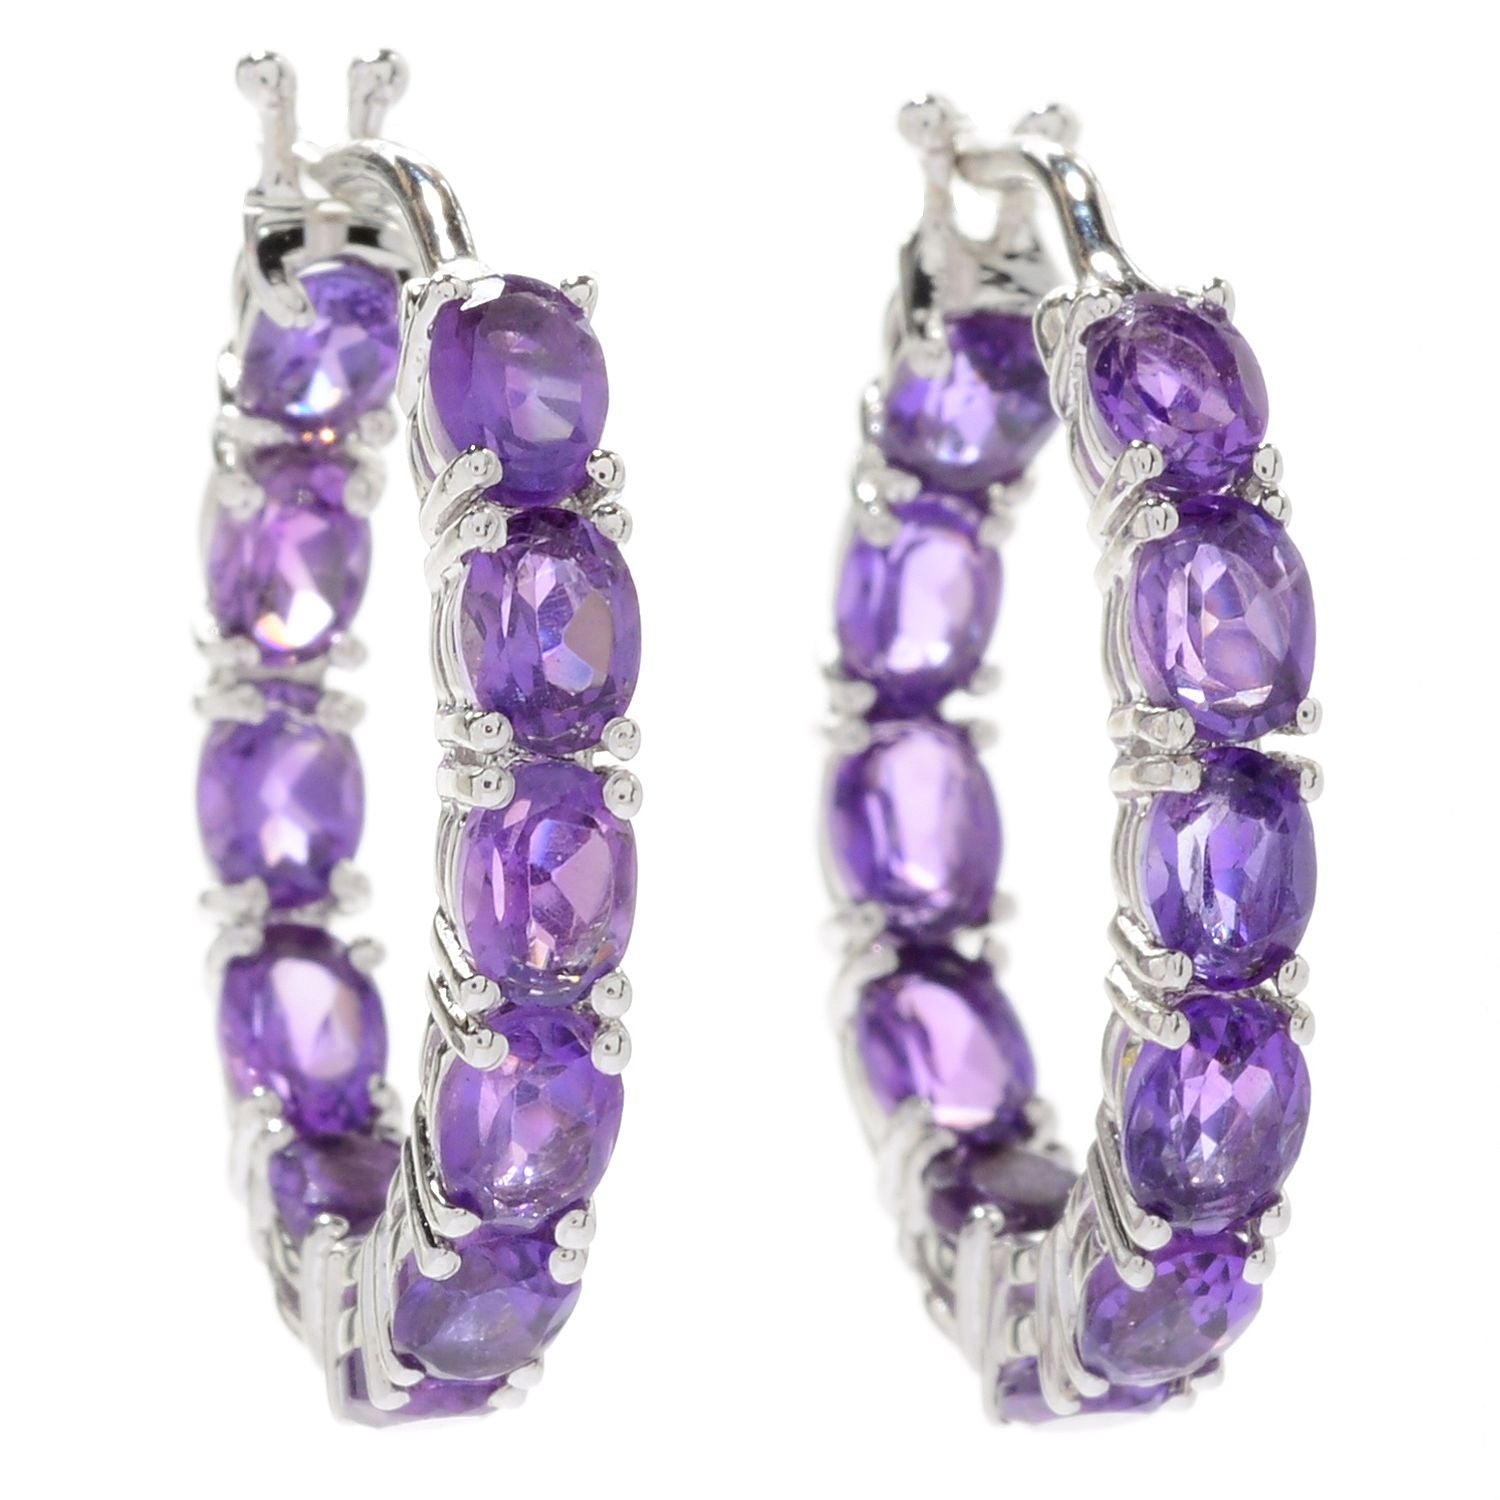 Pinctore Rhodium Over Sterling Silver 3.22ctw African Amethyst Hoops Earring 0.75'L - pinctore